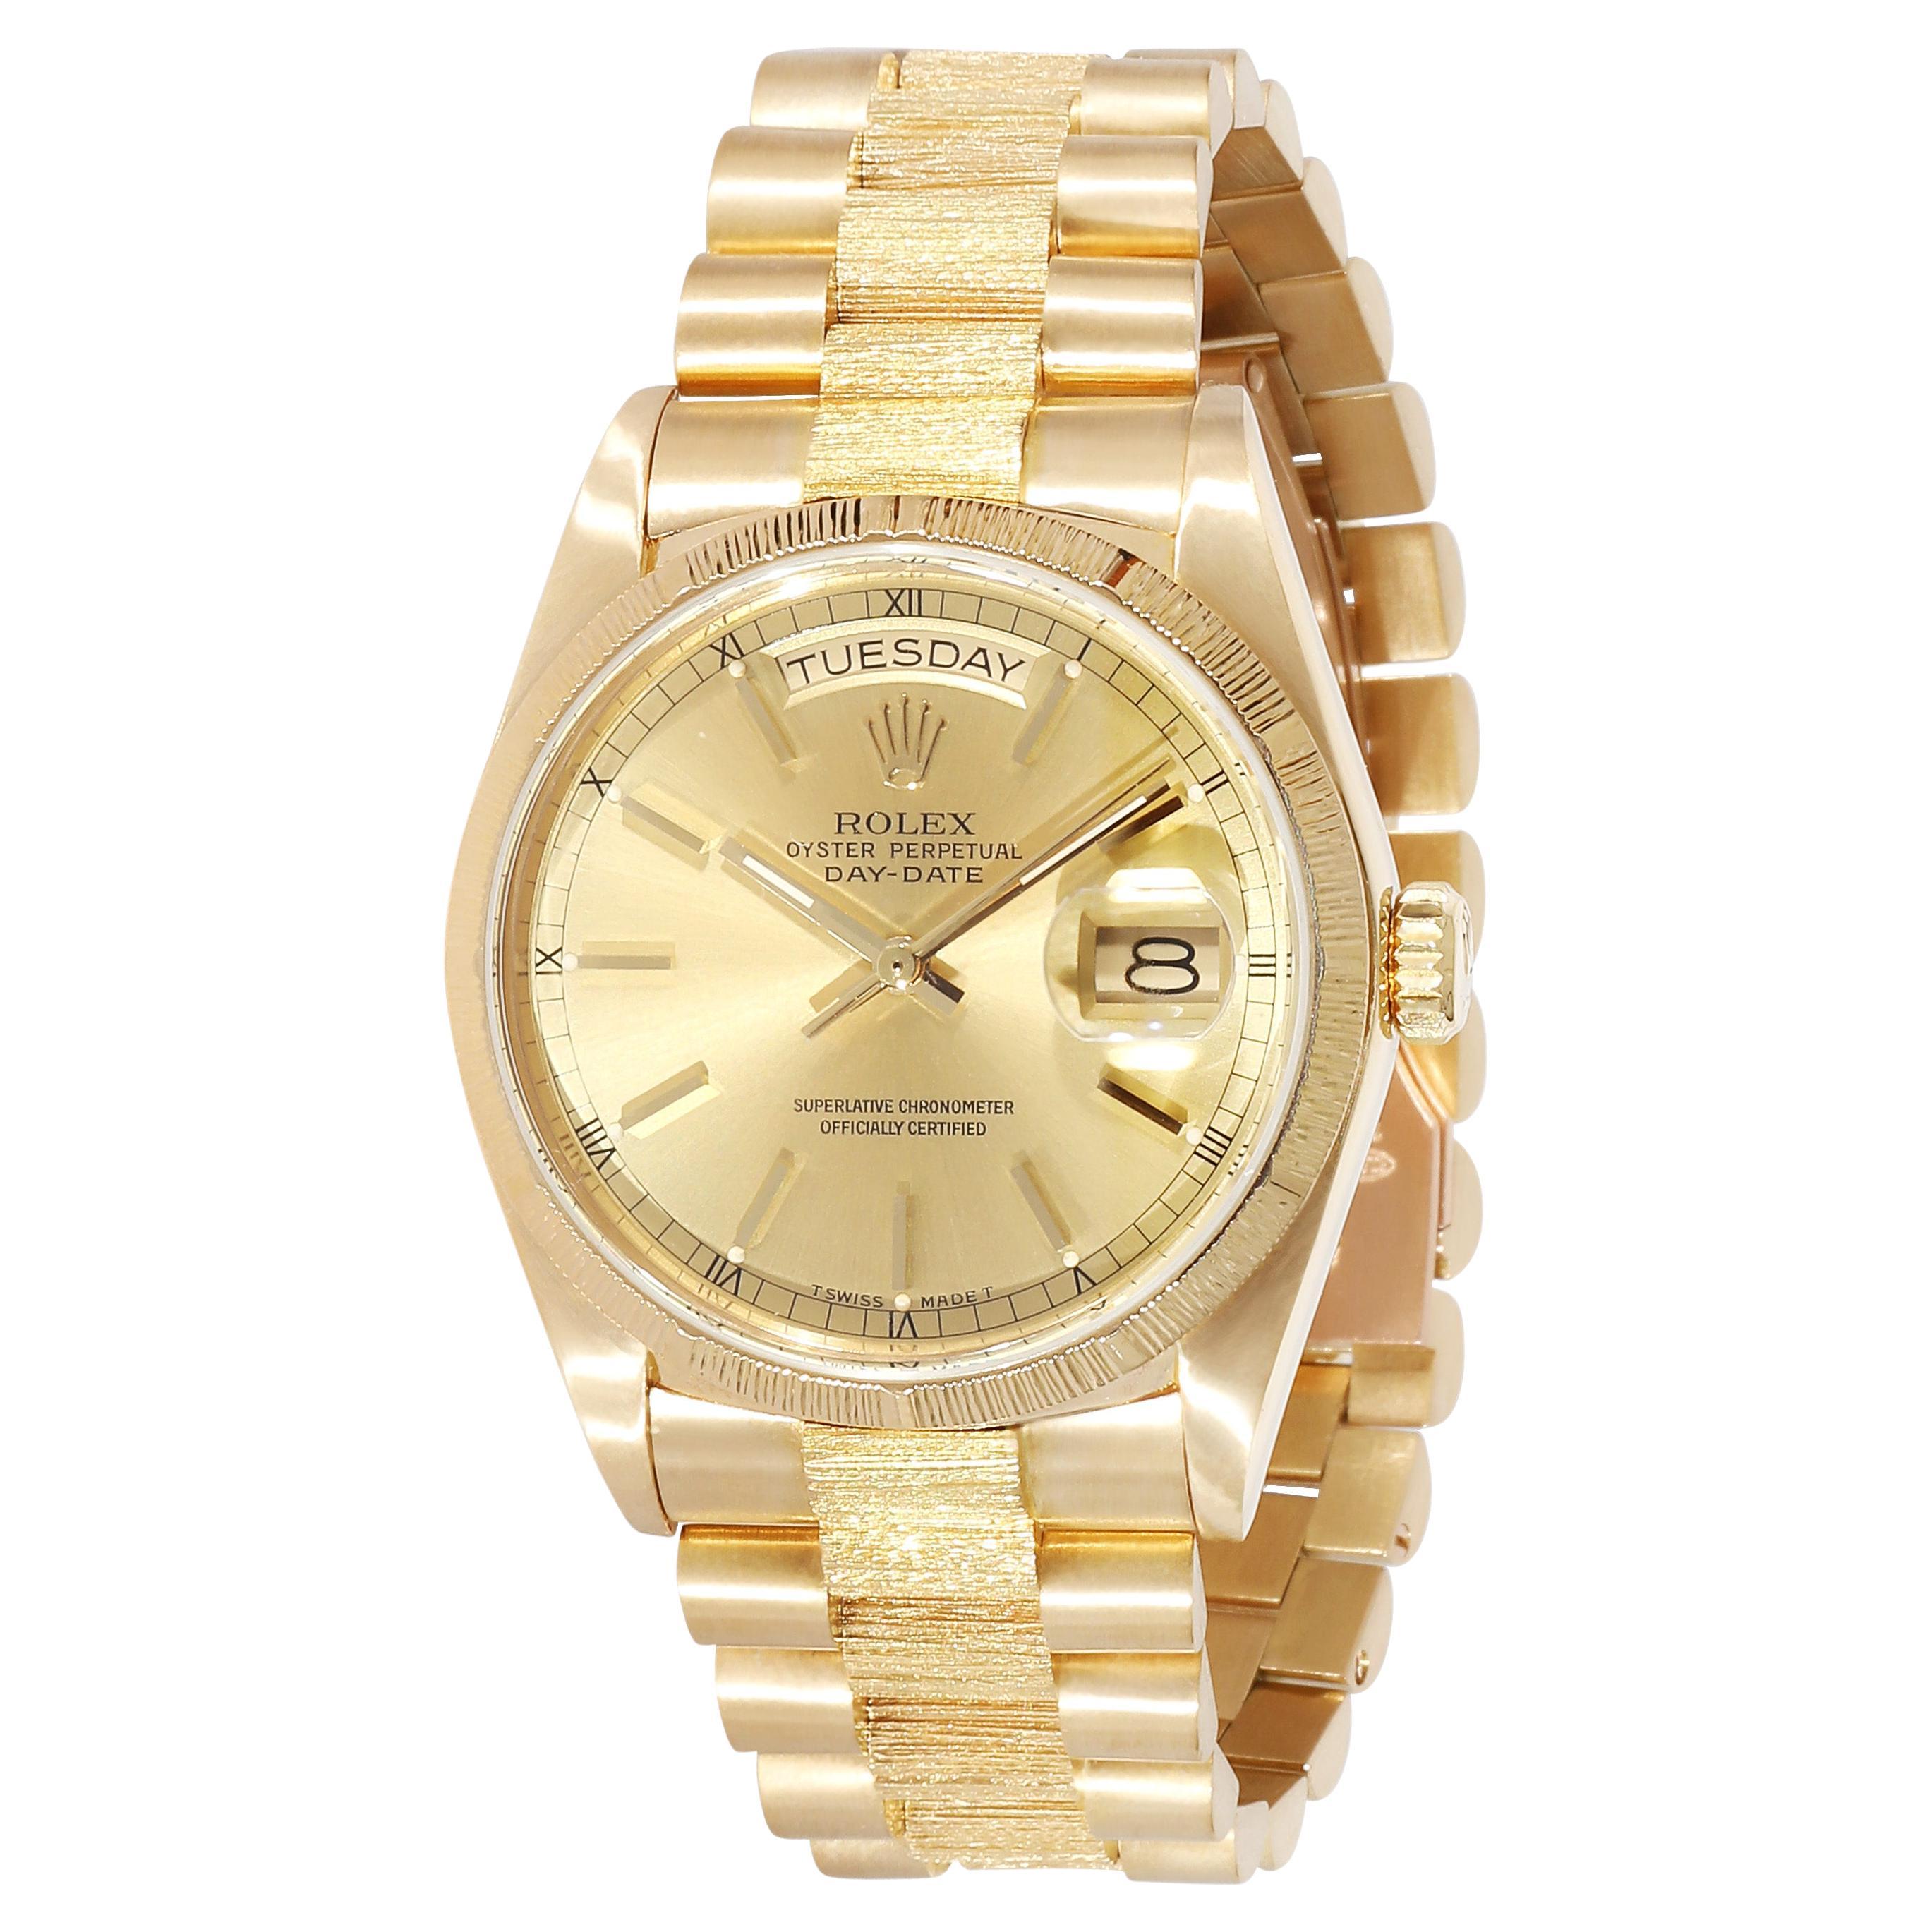 Rolex Day-Date 18078 Men's Watch in 18kt Yellow Gold For Sale